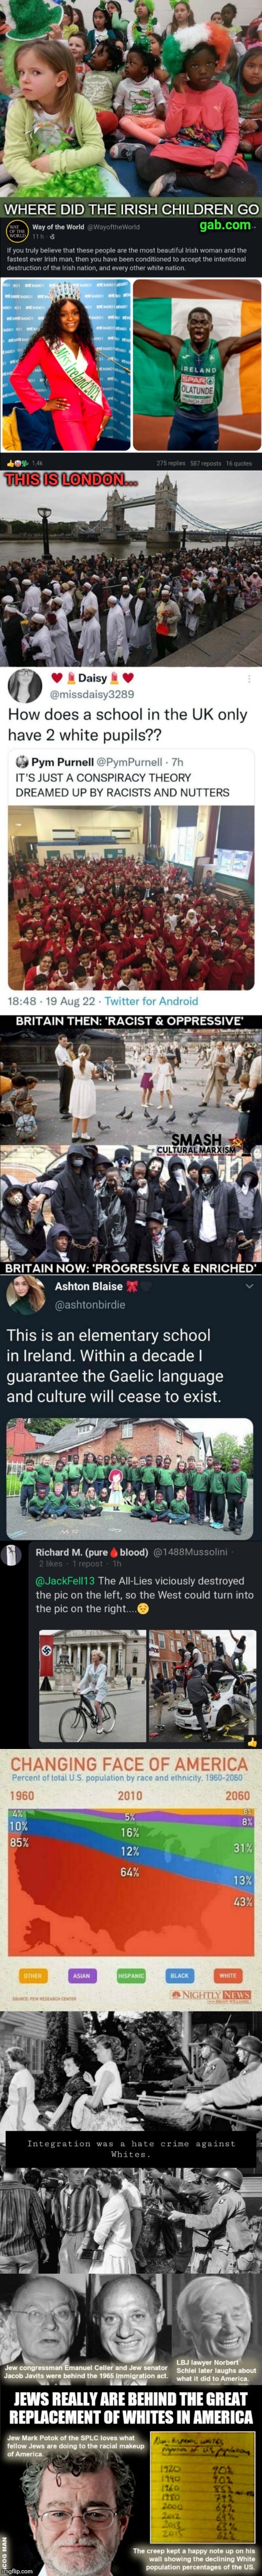 THIS IS A WHITE GENOCIDE | image tagged in this is a white genocide | made w/ Imgflip meme maker